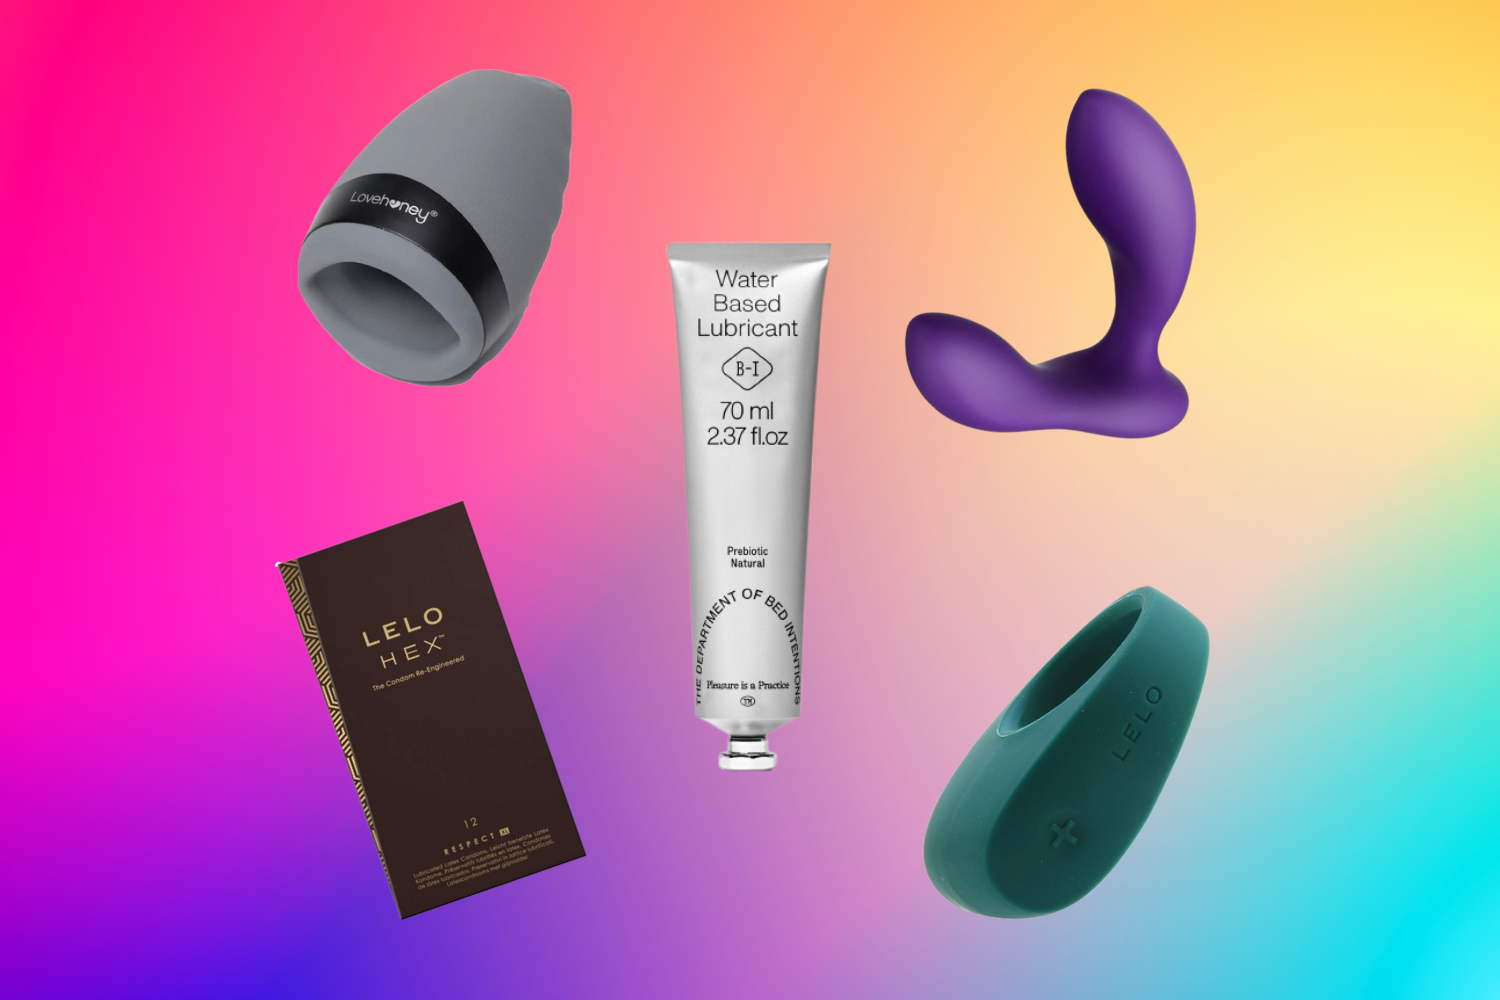 Our Earth Day picks of the best eco-friendly sex toys and products